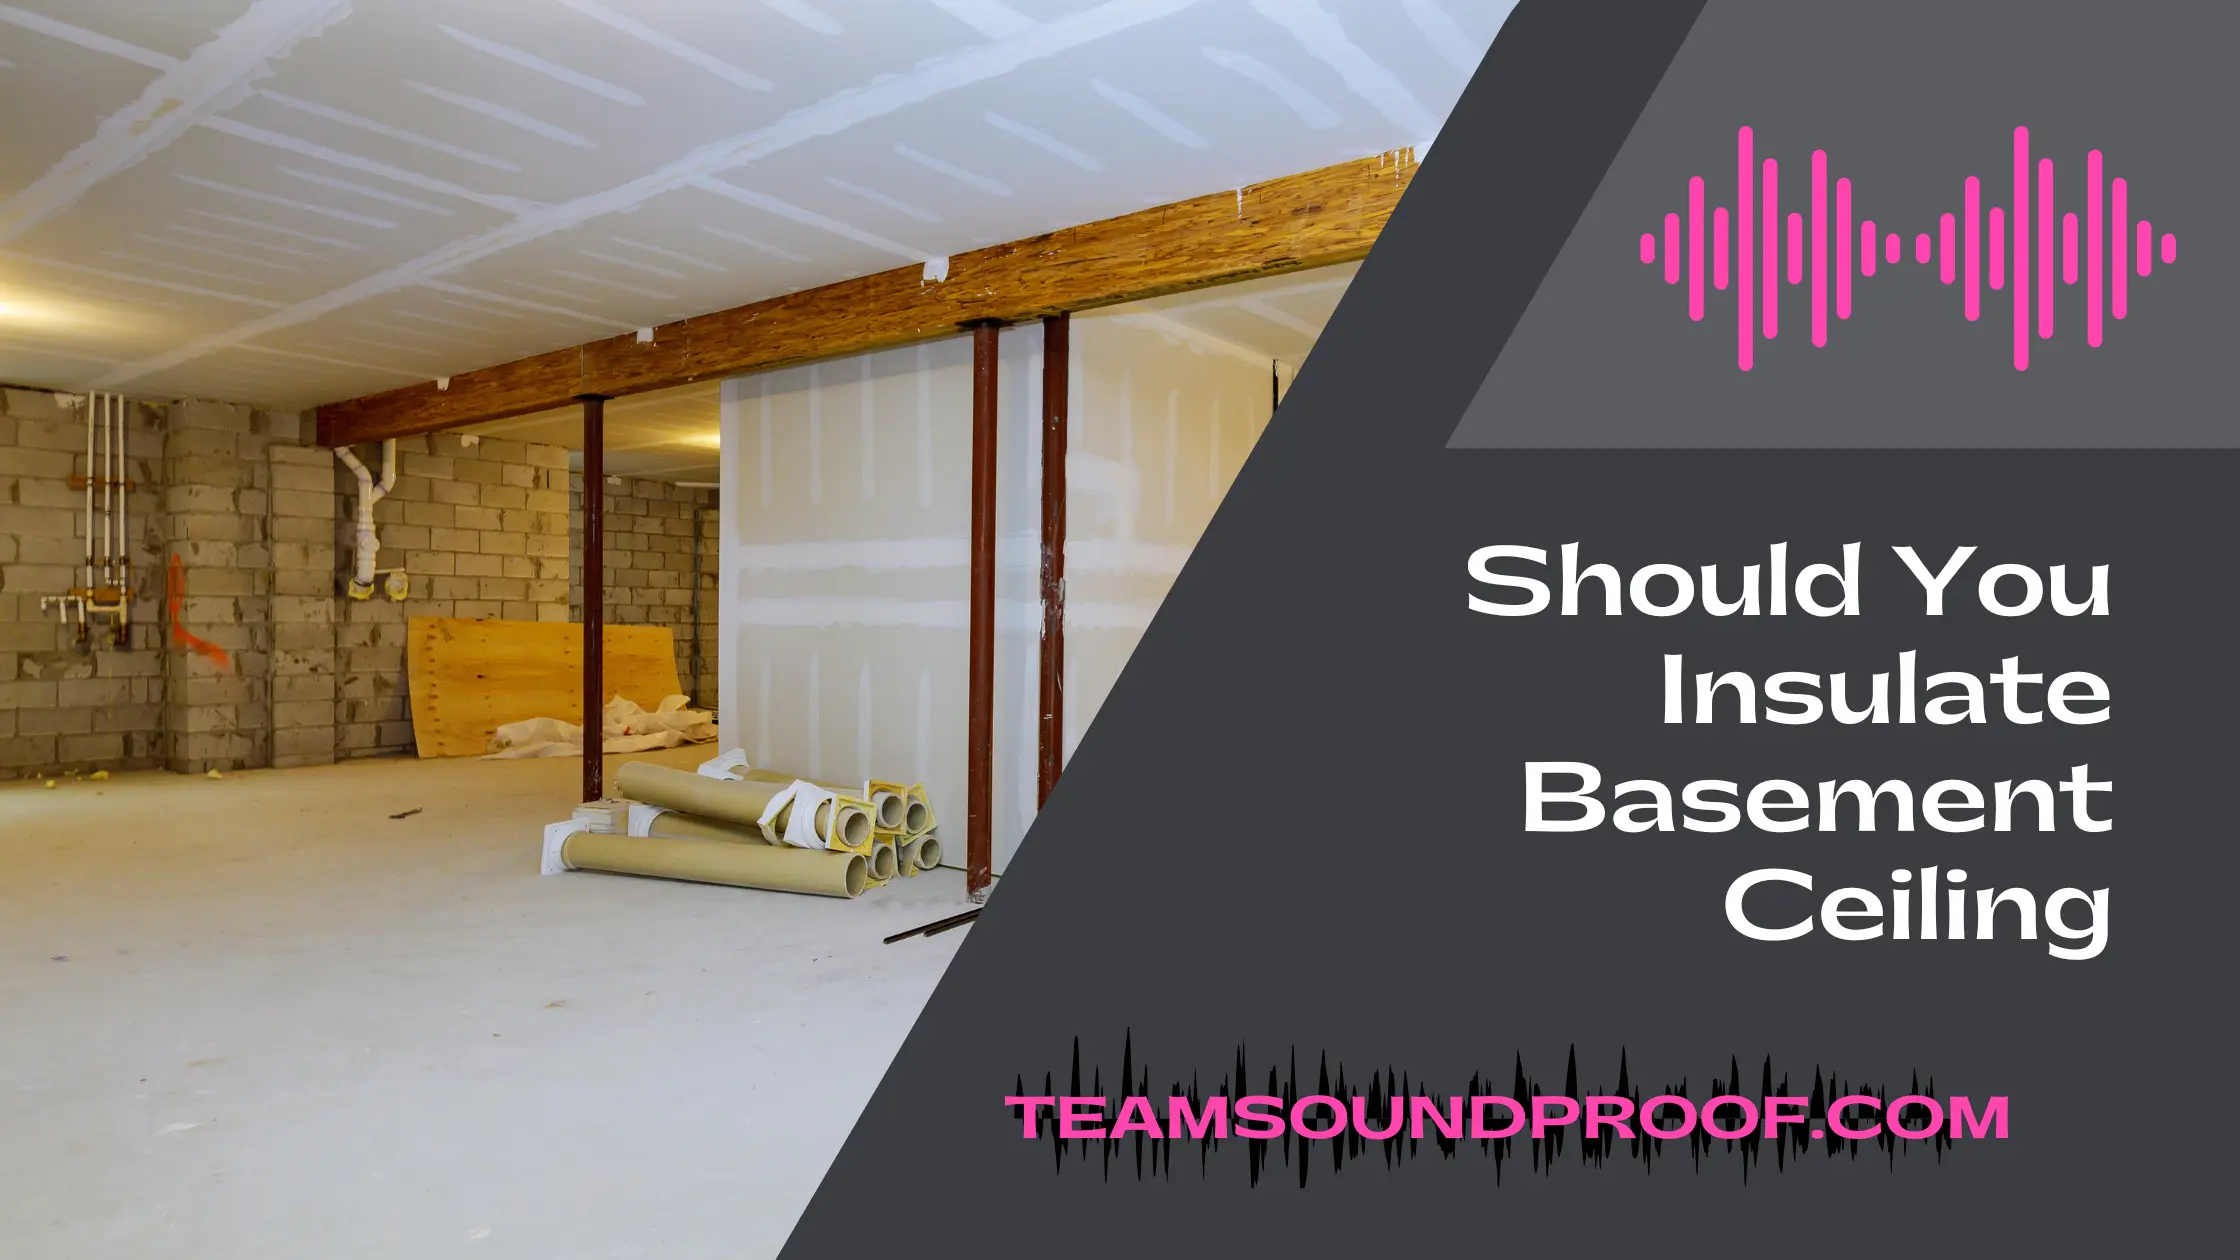 Should You Insulate Basement Ceiling? Why You Need it?